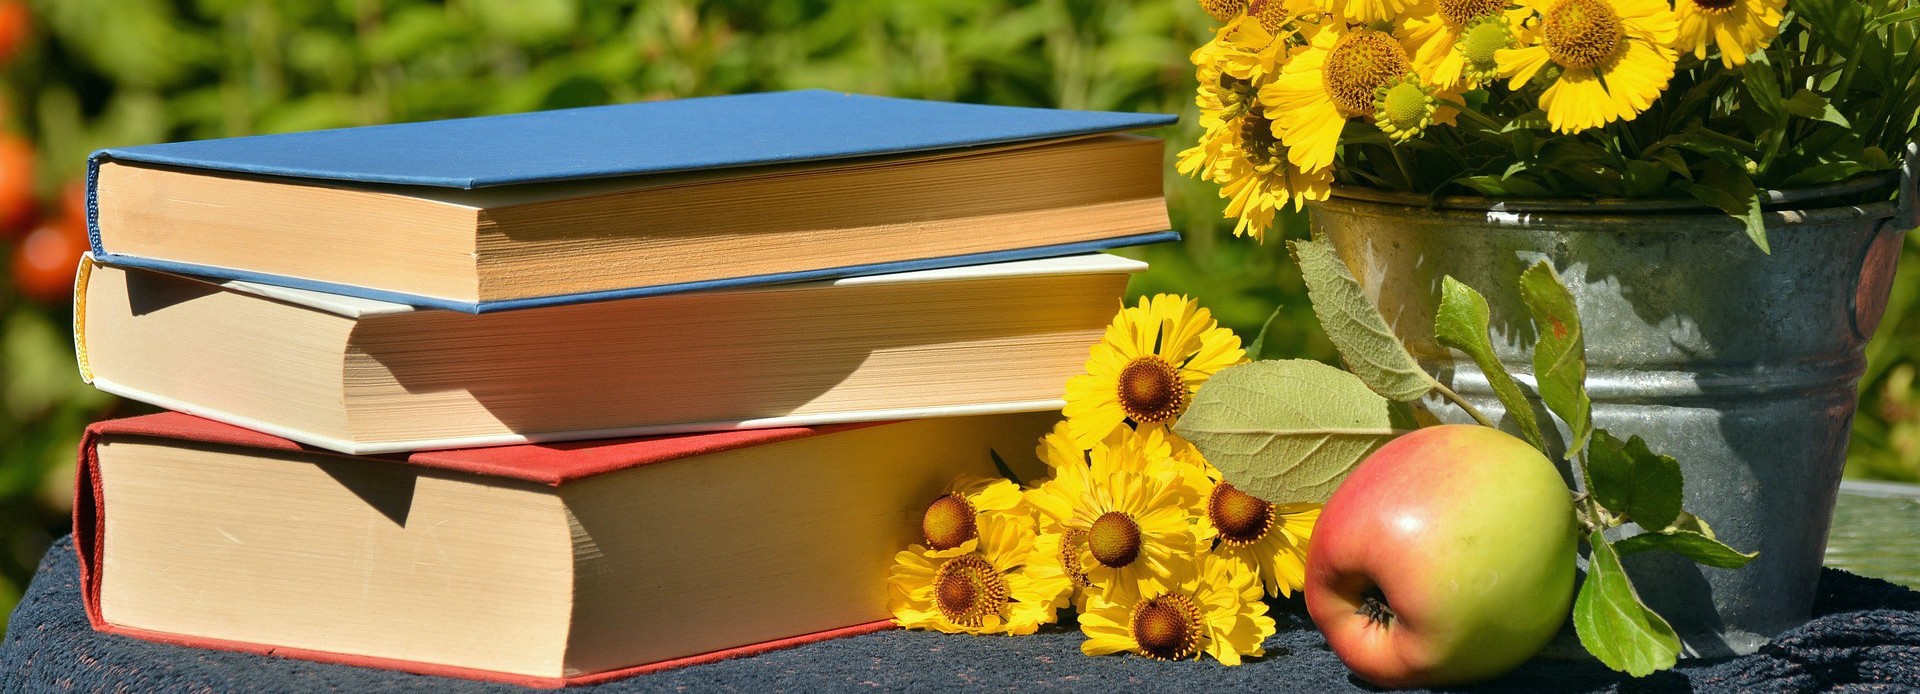 Books, apple and flowers on a jarden table